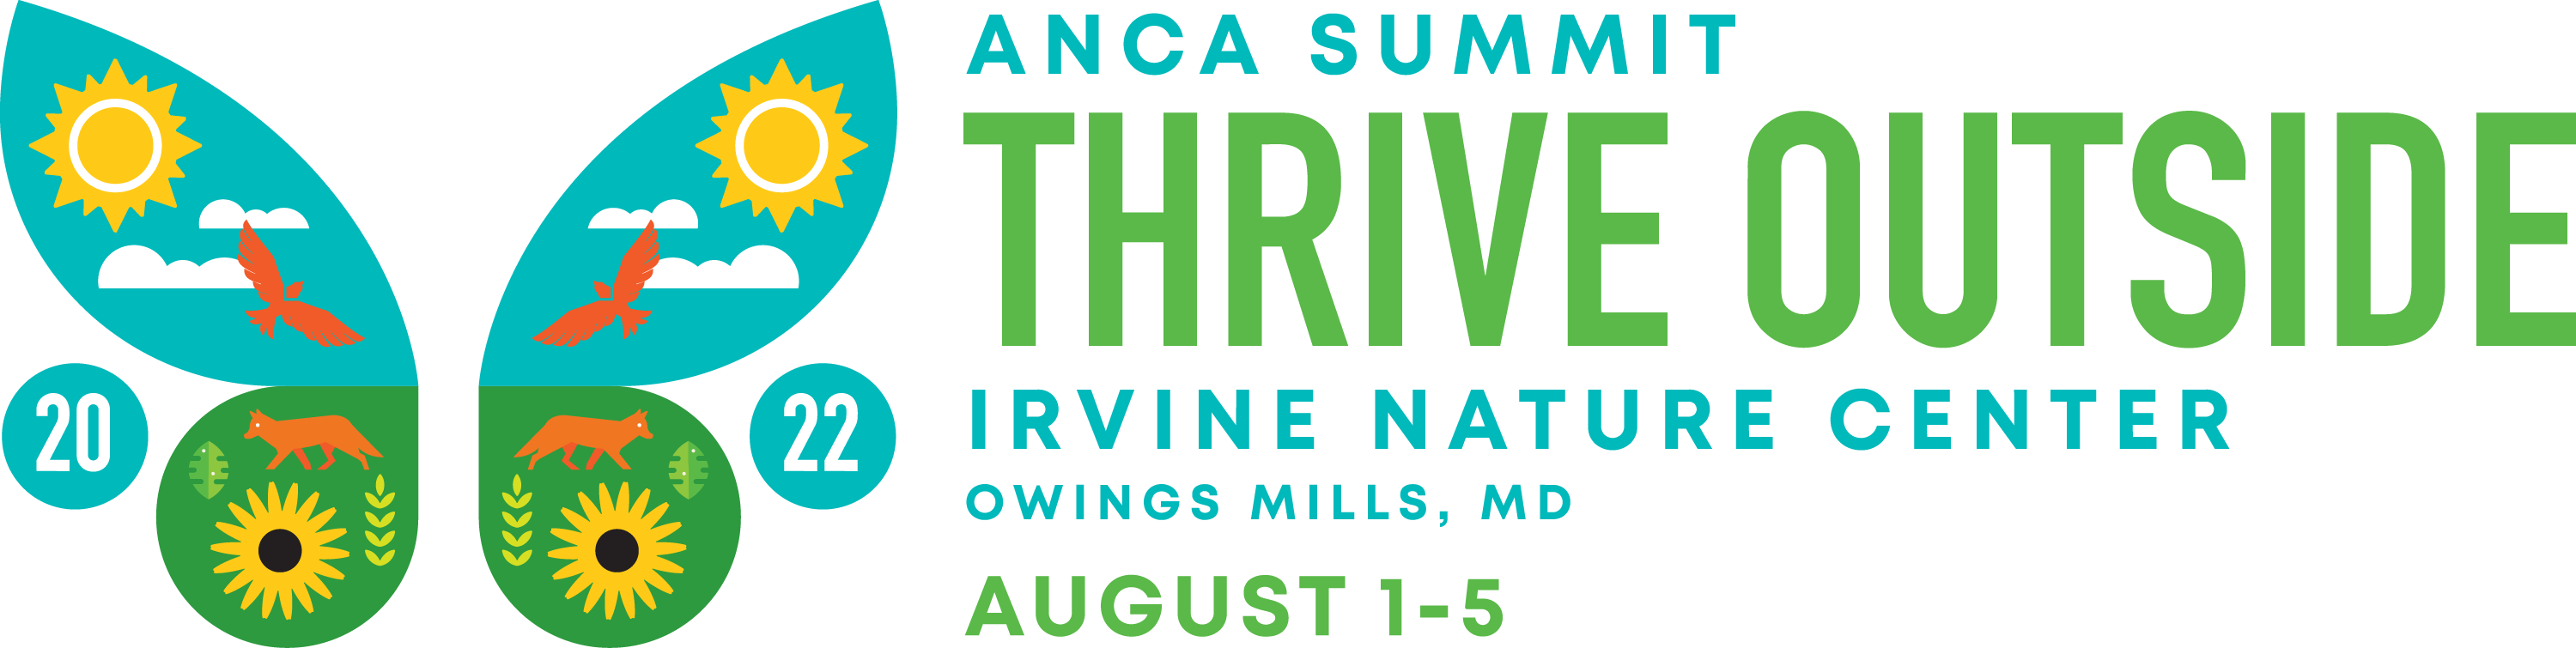 Logo: ANCA Summit | Thrive Outside | Irvine Nature Center | Owings Mills, Md | August 1-5